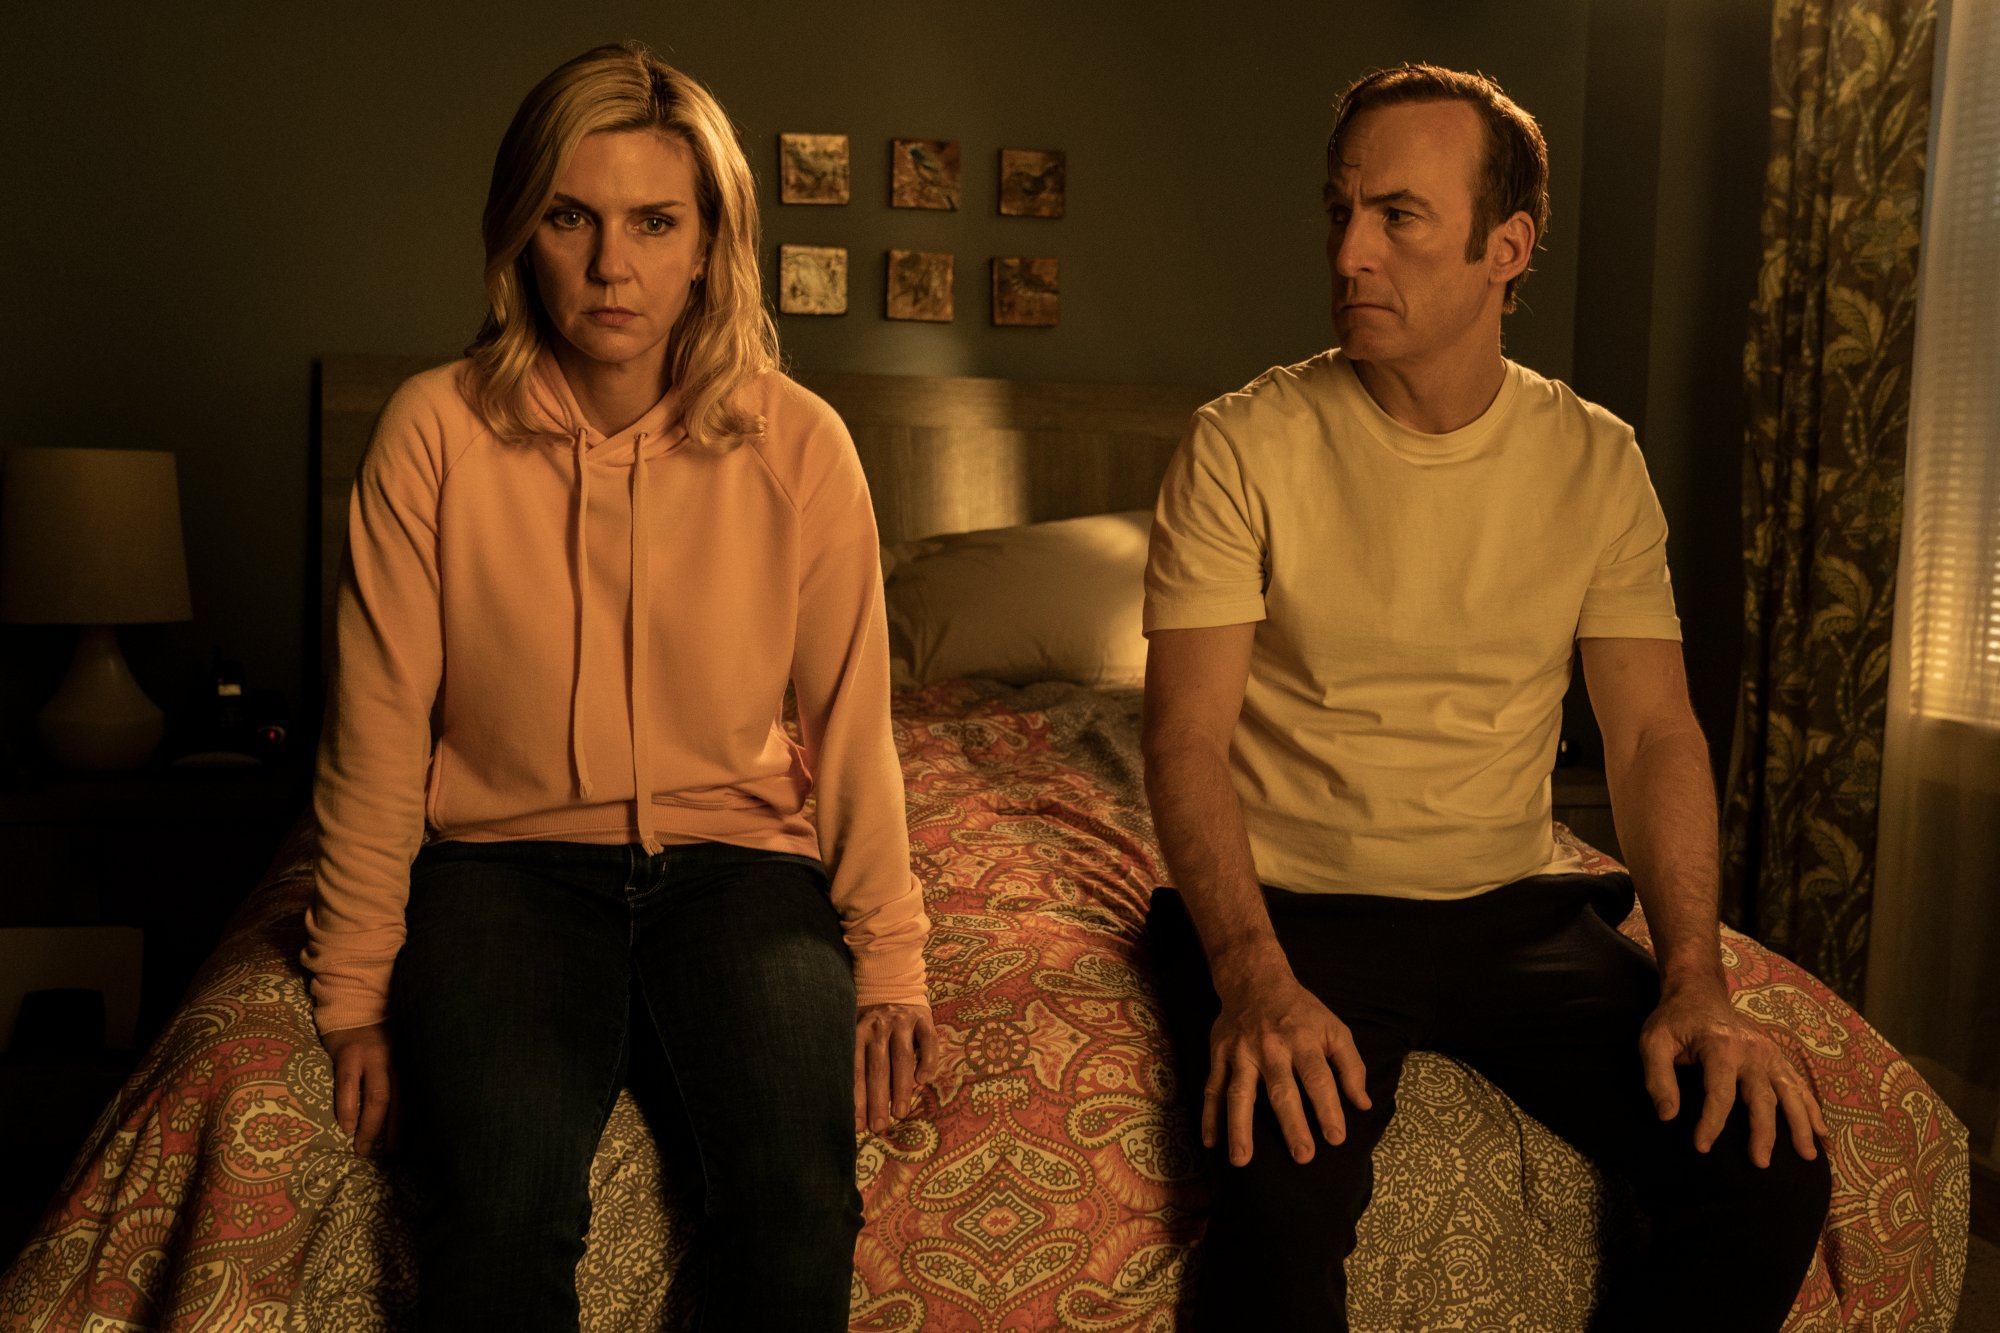 Rhea Seehorn and Bob Odenkirk in 'Better Call Saul' Season 6 Part 2, which has the same episode release schedule as part 1. They're sitting on a bed, and both look distressed.